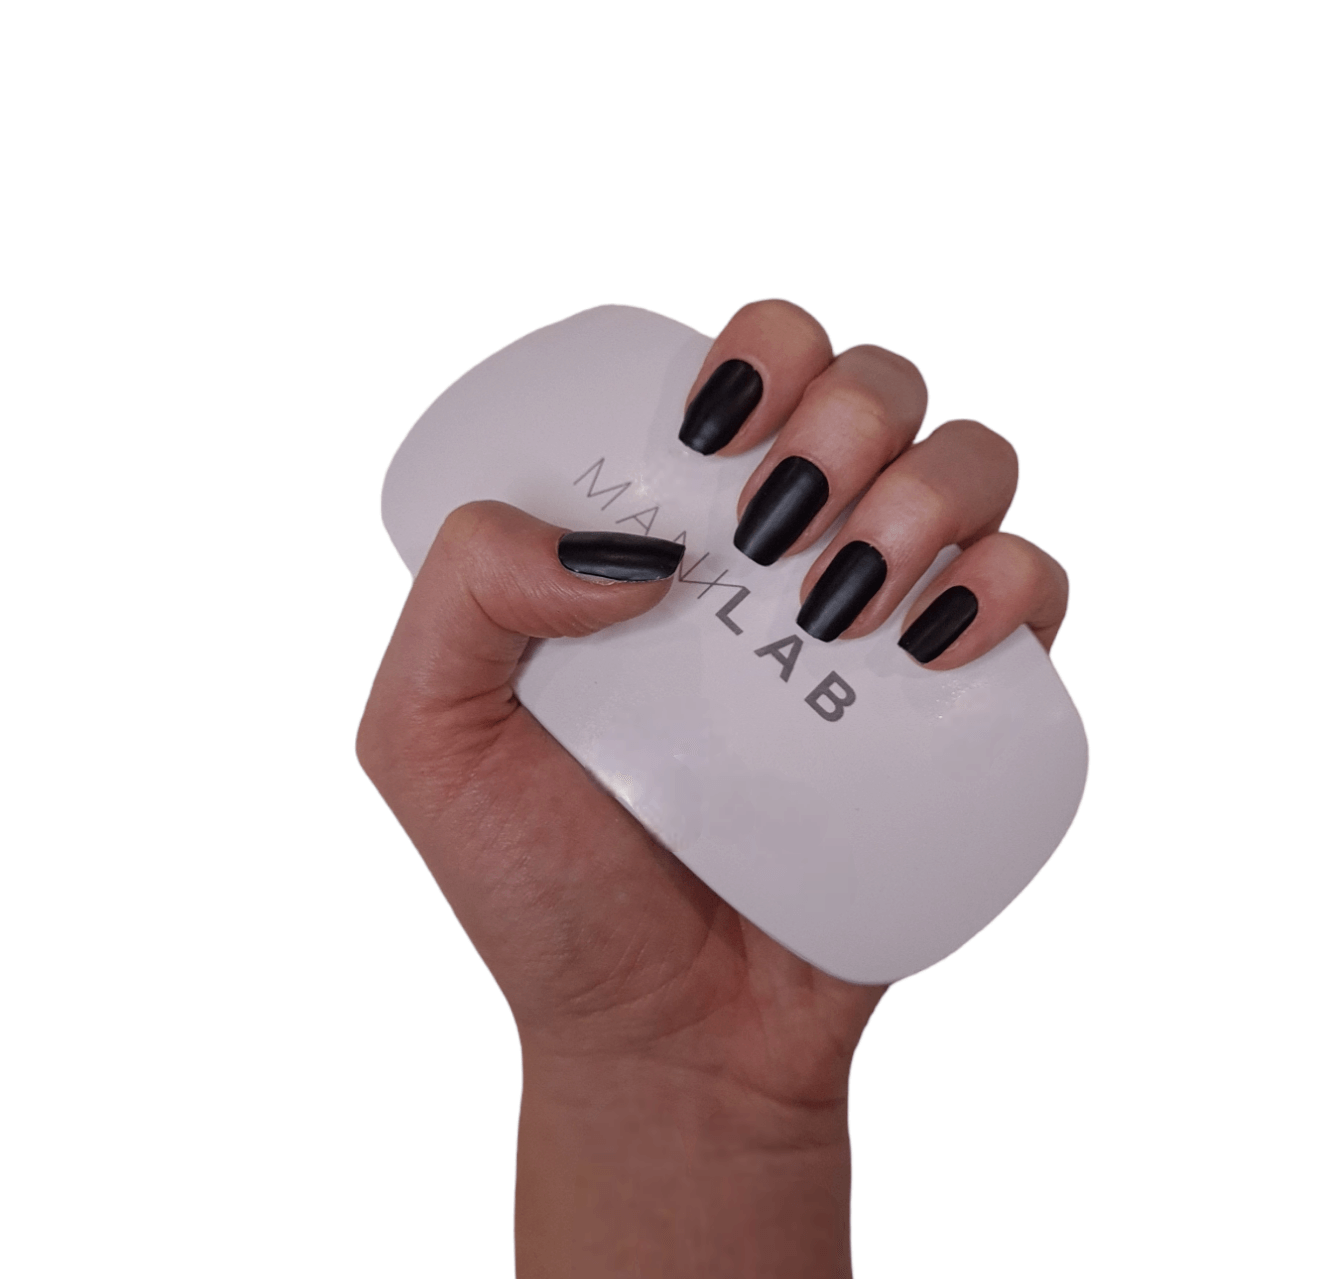 Our matte black semi-cured gel nails displayed on a hand 